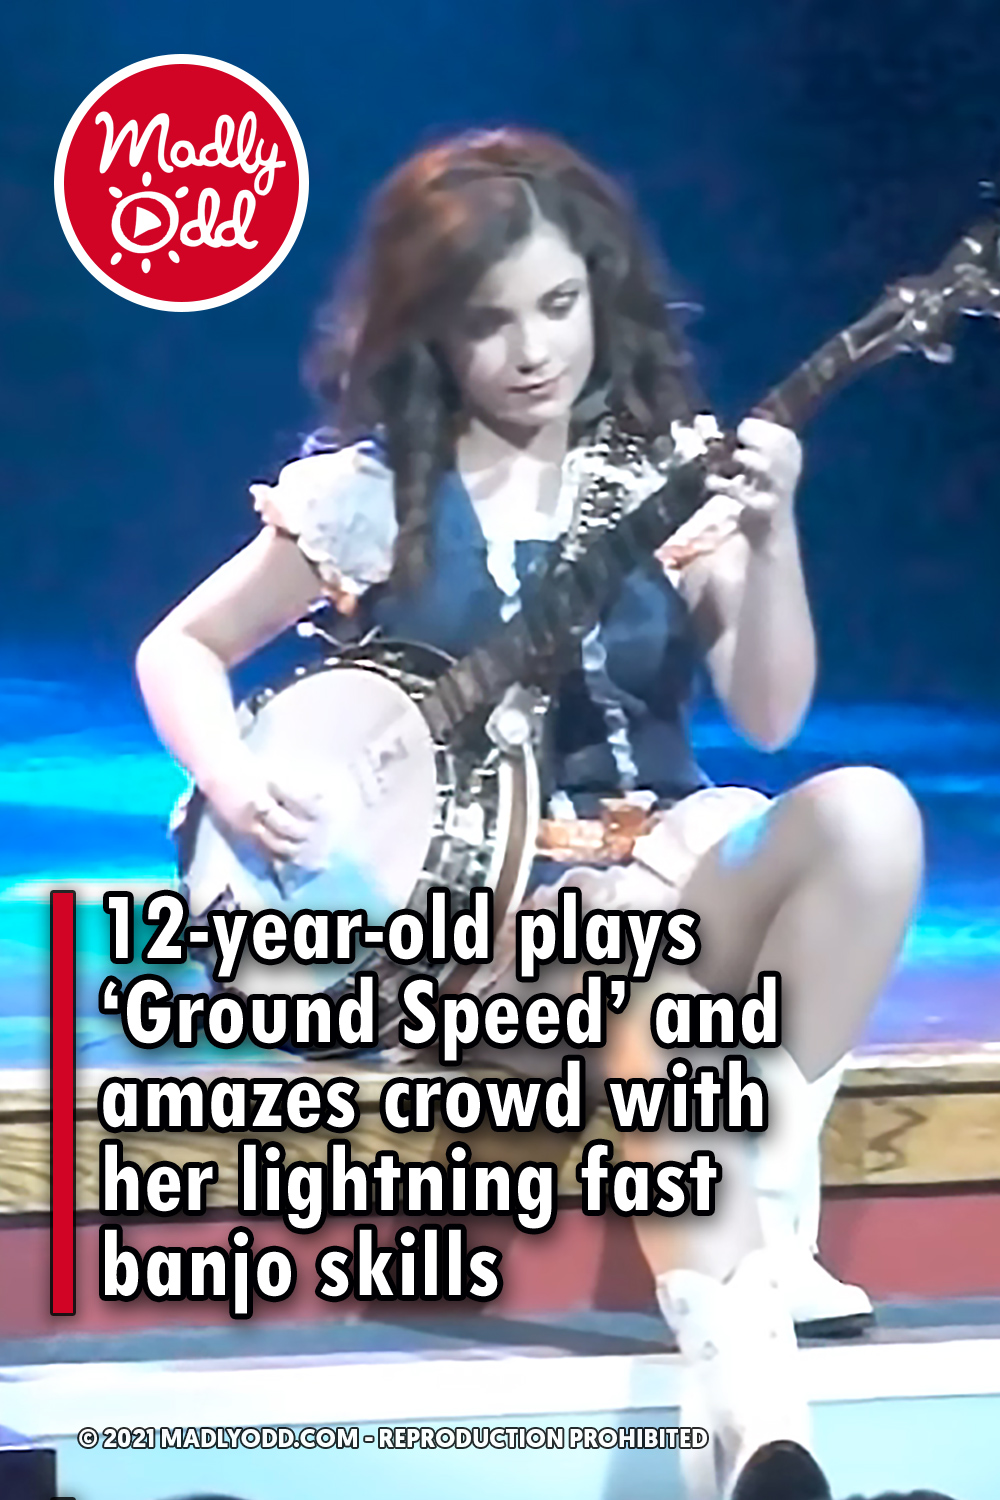 12-year-old plays ‘Ground Speed’ and amazes crowd with her lightning fast banjo skills